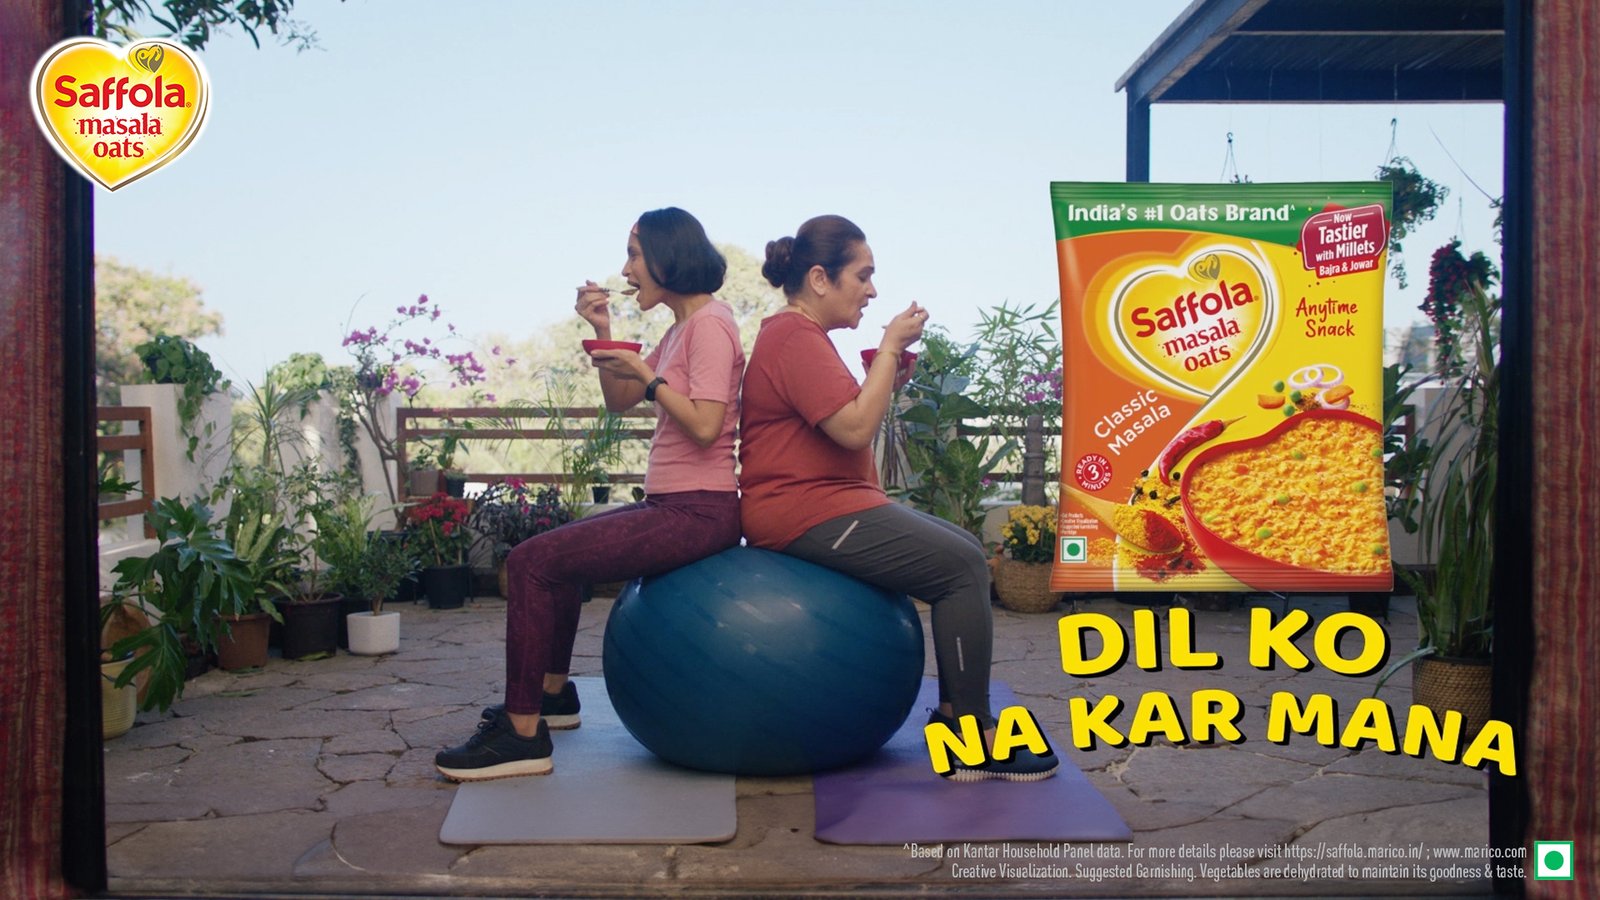 Saffola Oats launches of new campaign for flavoured Oats range